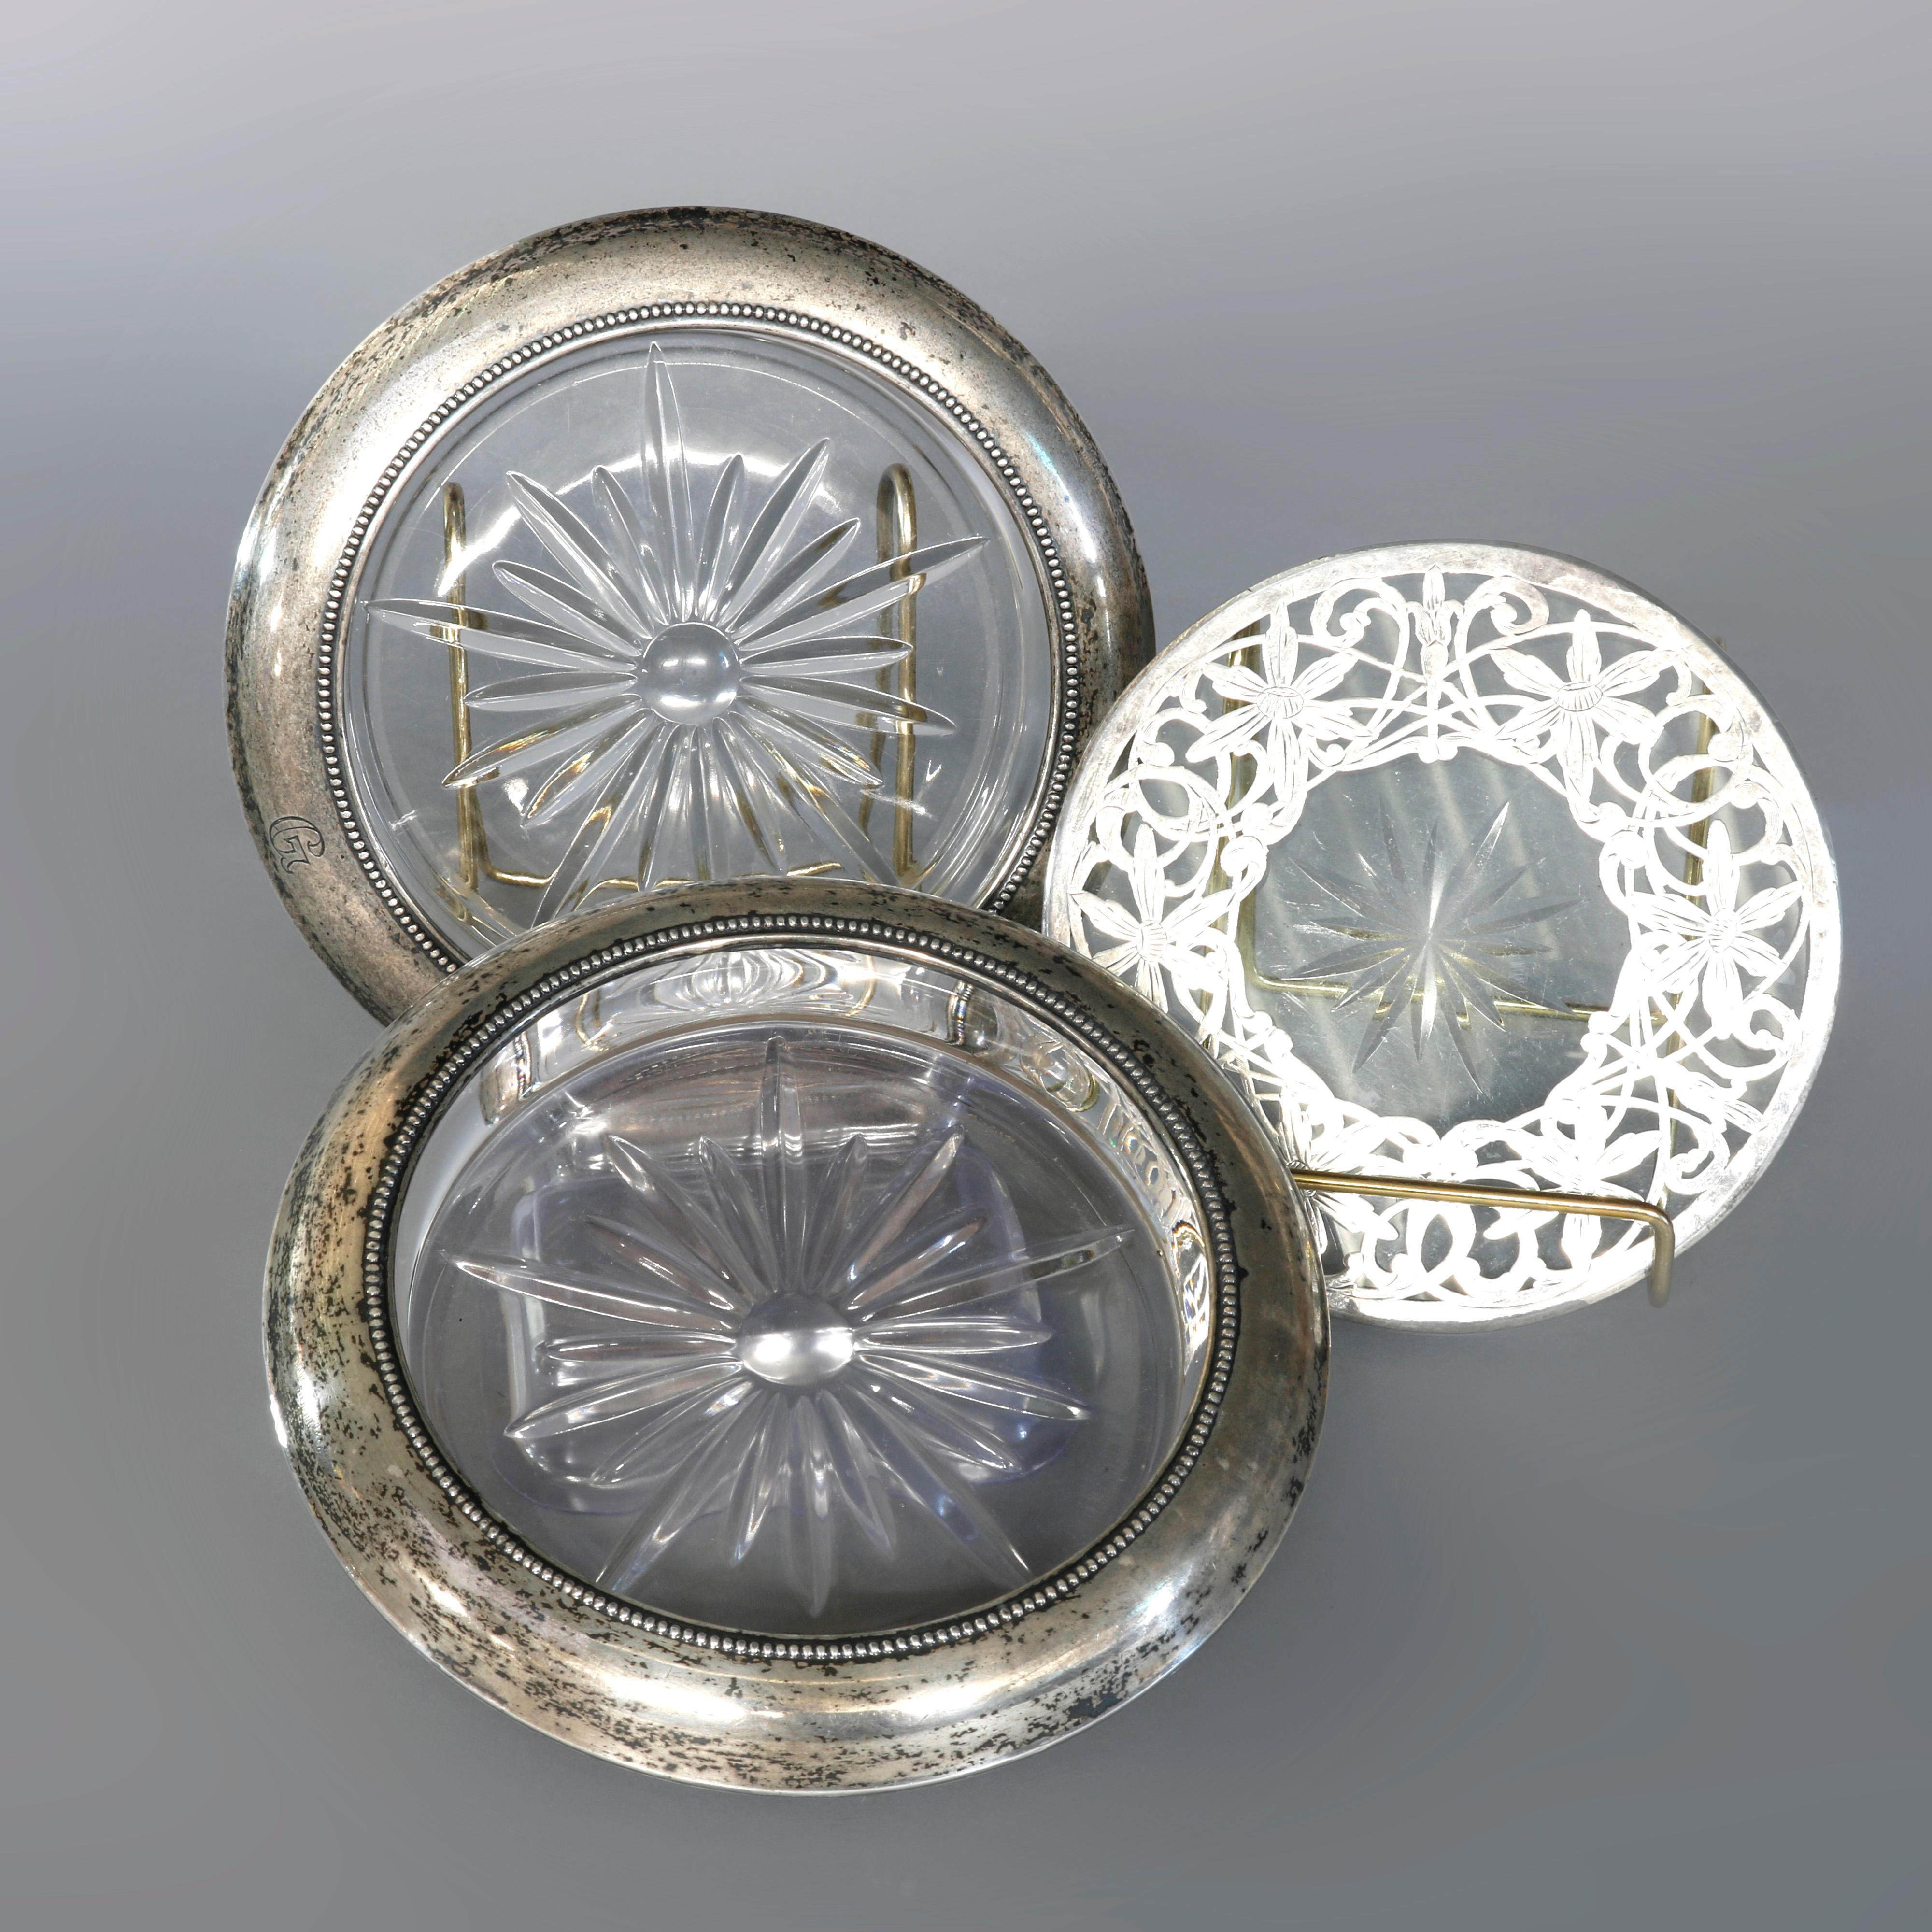 A vintage air of glass coasters offer pressed glass construction with sterling silver rim, set includes pressed glass trivet with foliate filigree overlay, circa 1940.

Measures- Coasters- 6.75